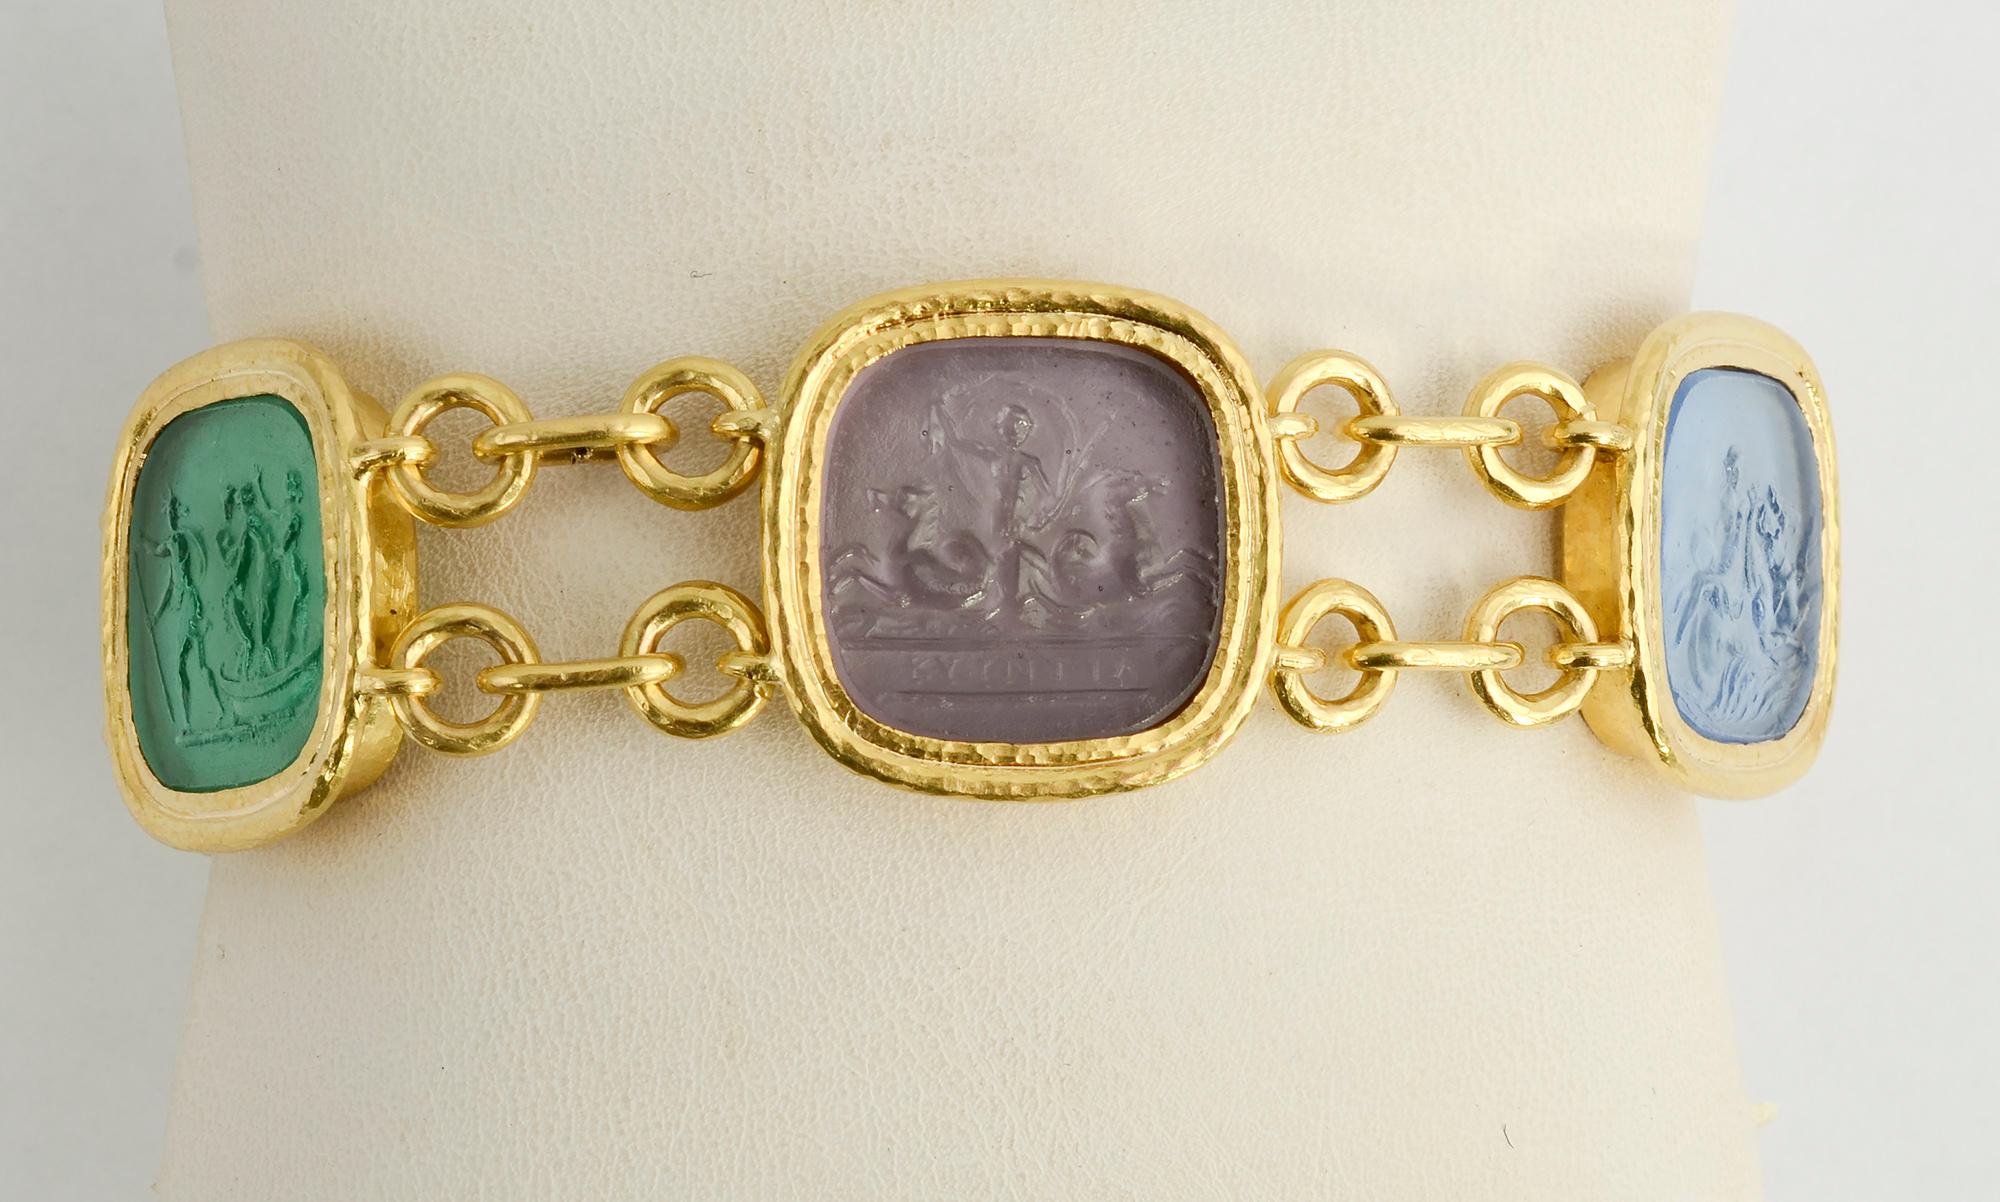 Elizabeth Locke intaglio bracelet depicting scenes of ancient life with humans and animals. The five Venetian glass medallions are beautifully color coordinated.
The bracelet has a wearable length of 7 7/8 inches. An additional medallion can be